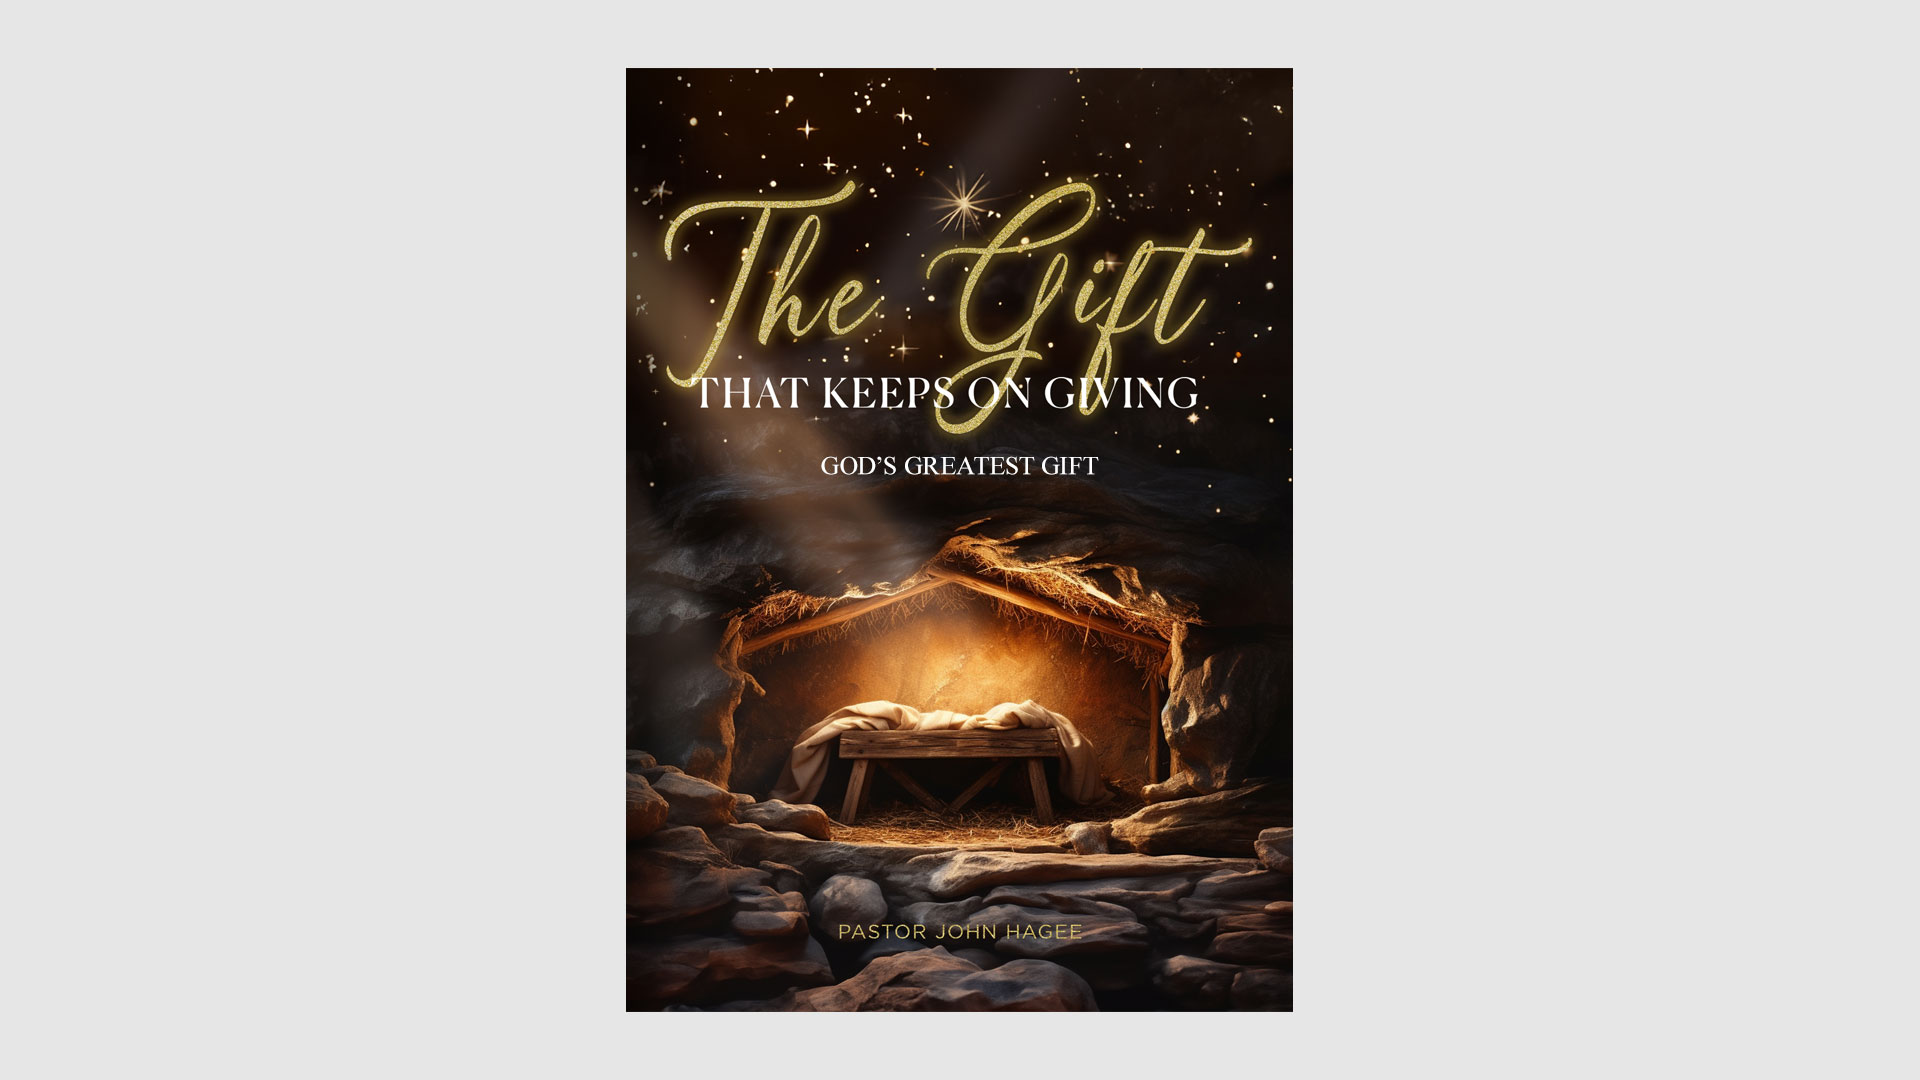 The Wonder of Giving | The Well